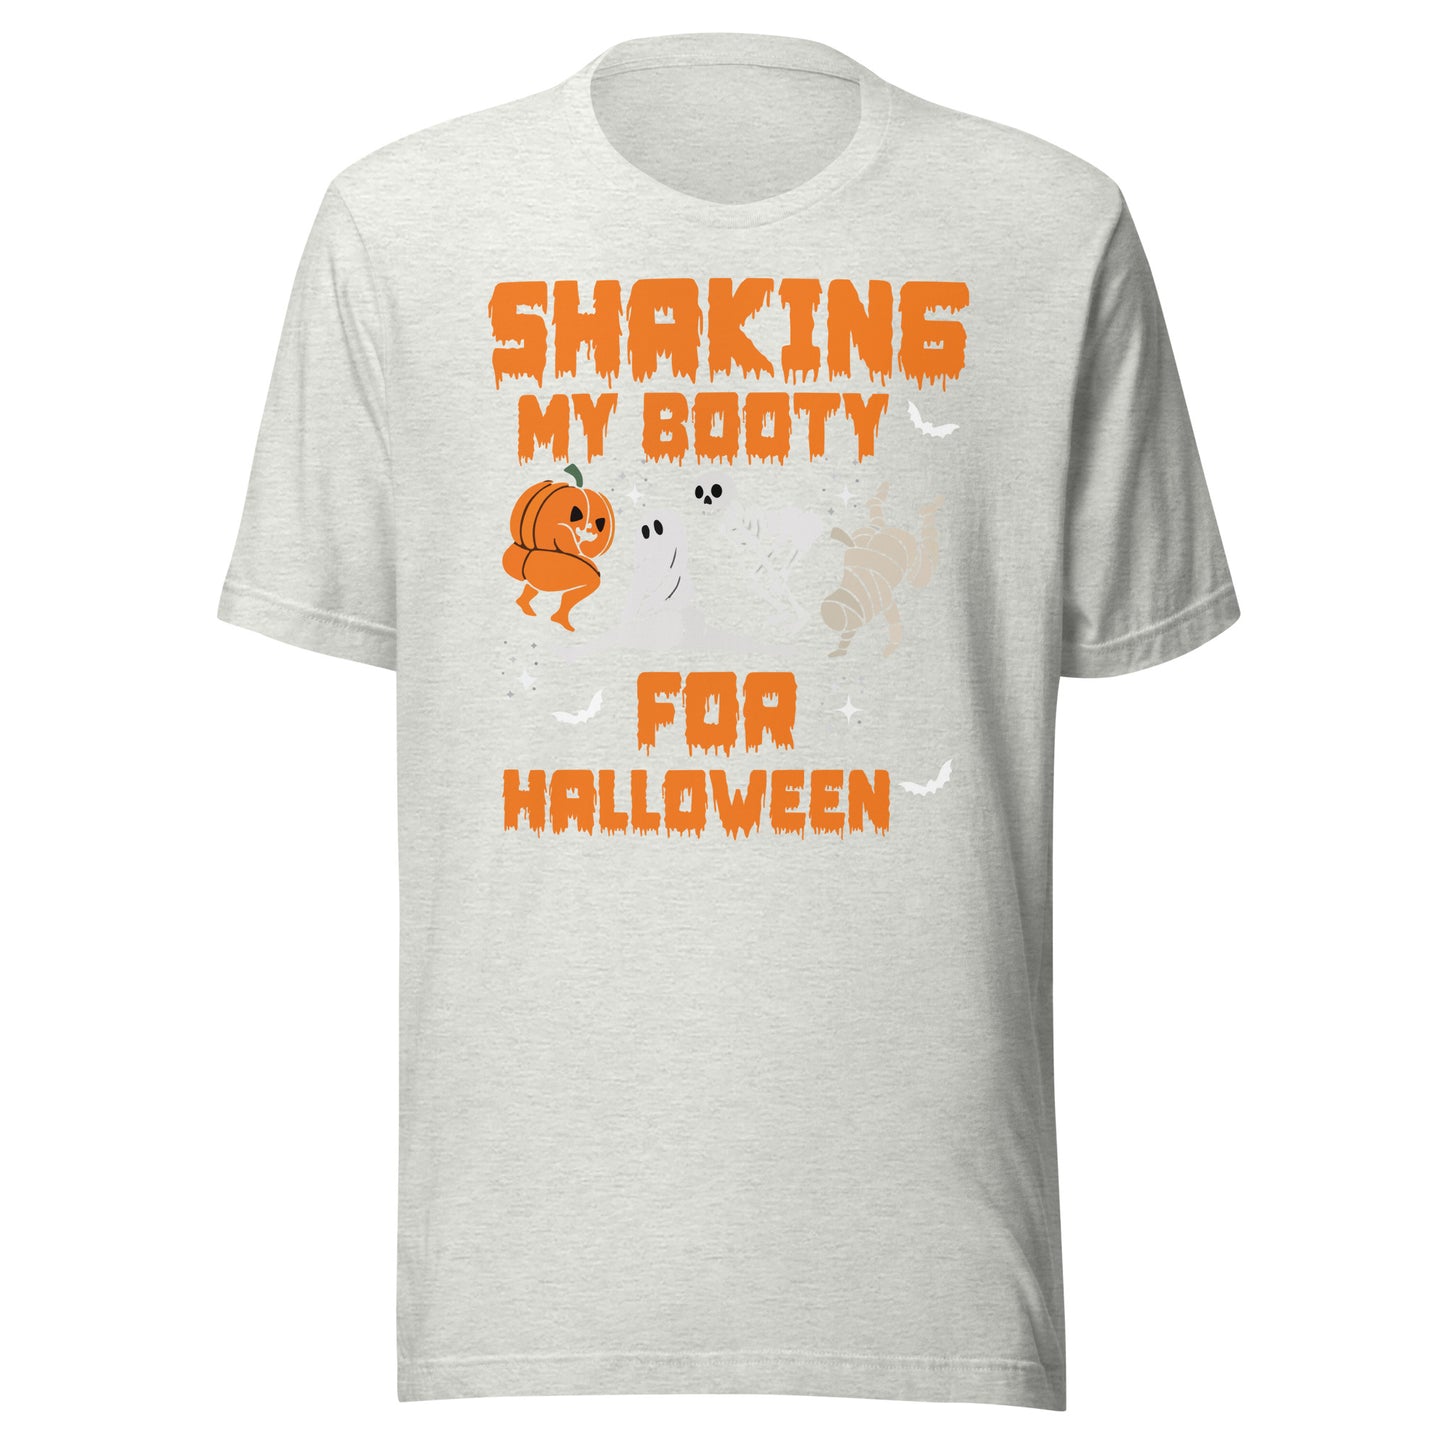 shaking my booty FOR HALLOWEEN Unisex t-shirt